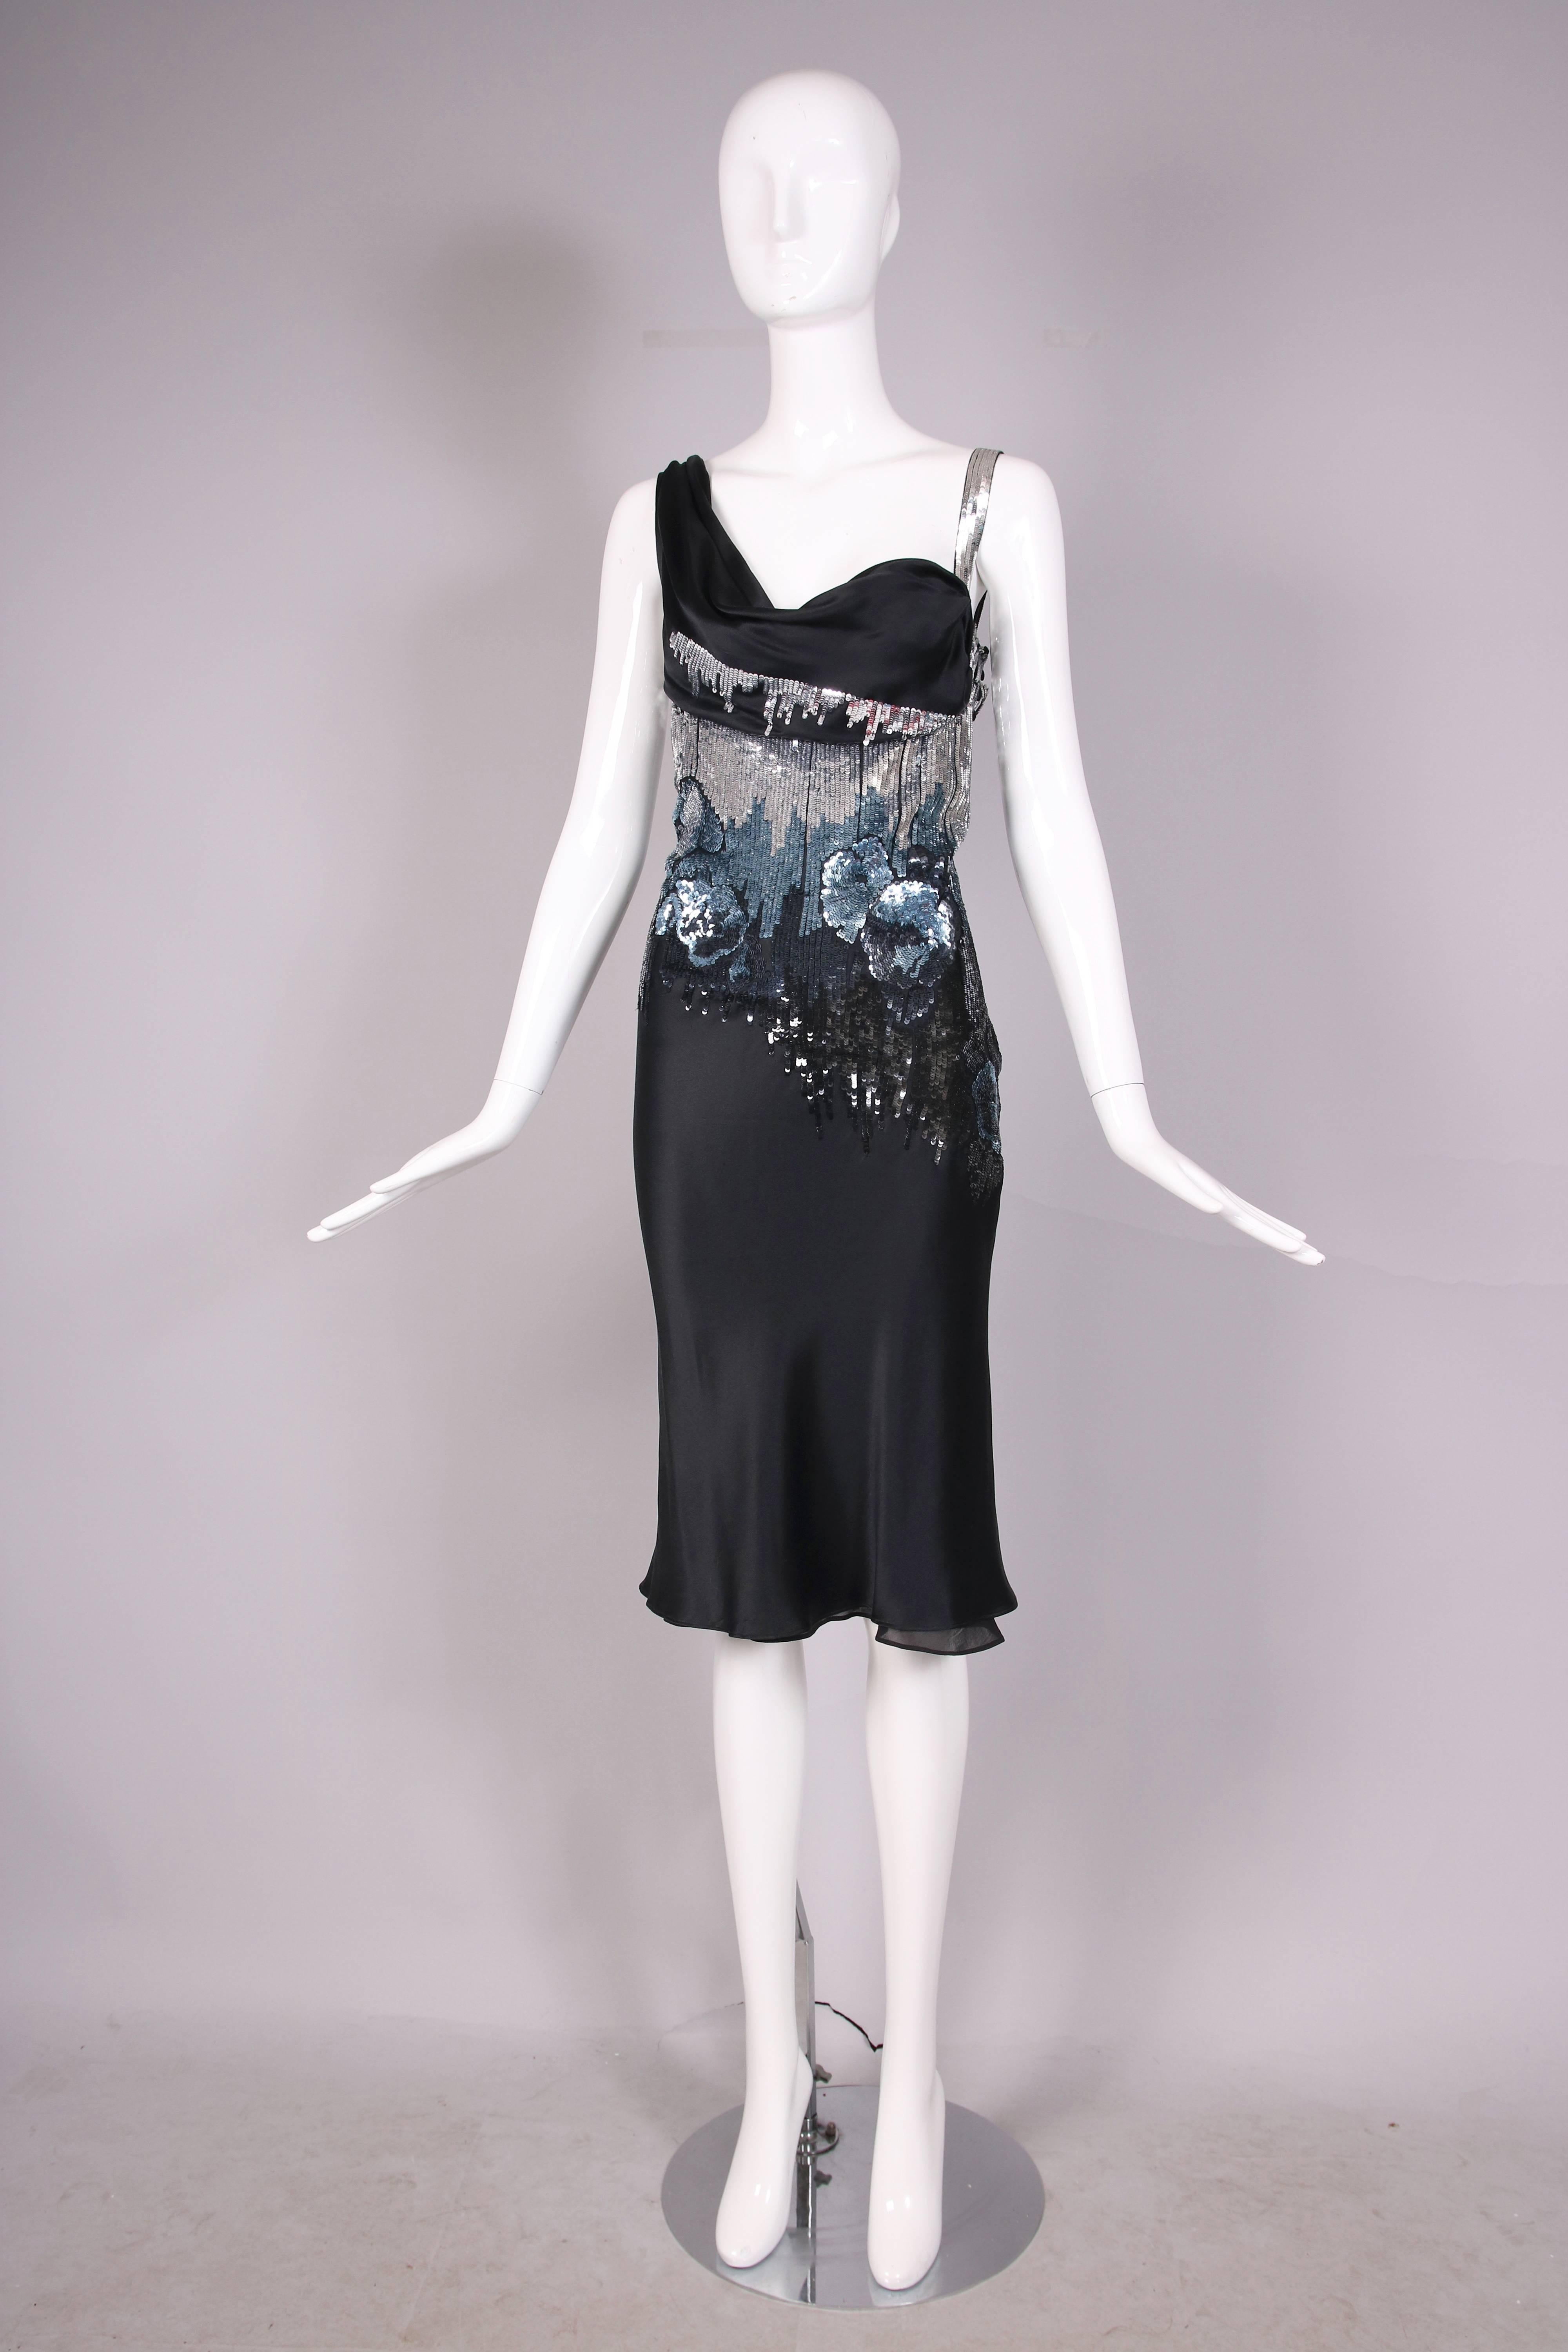 John Galliano black silk charmeuse cocktail dress with the bodice featuring silver, blue, and black sequins in a graphic ombre print as well as sequined roses. One should strap is made entirely of silver sequins and the bust is draped with black